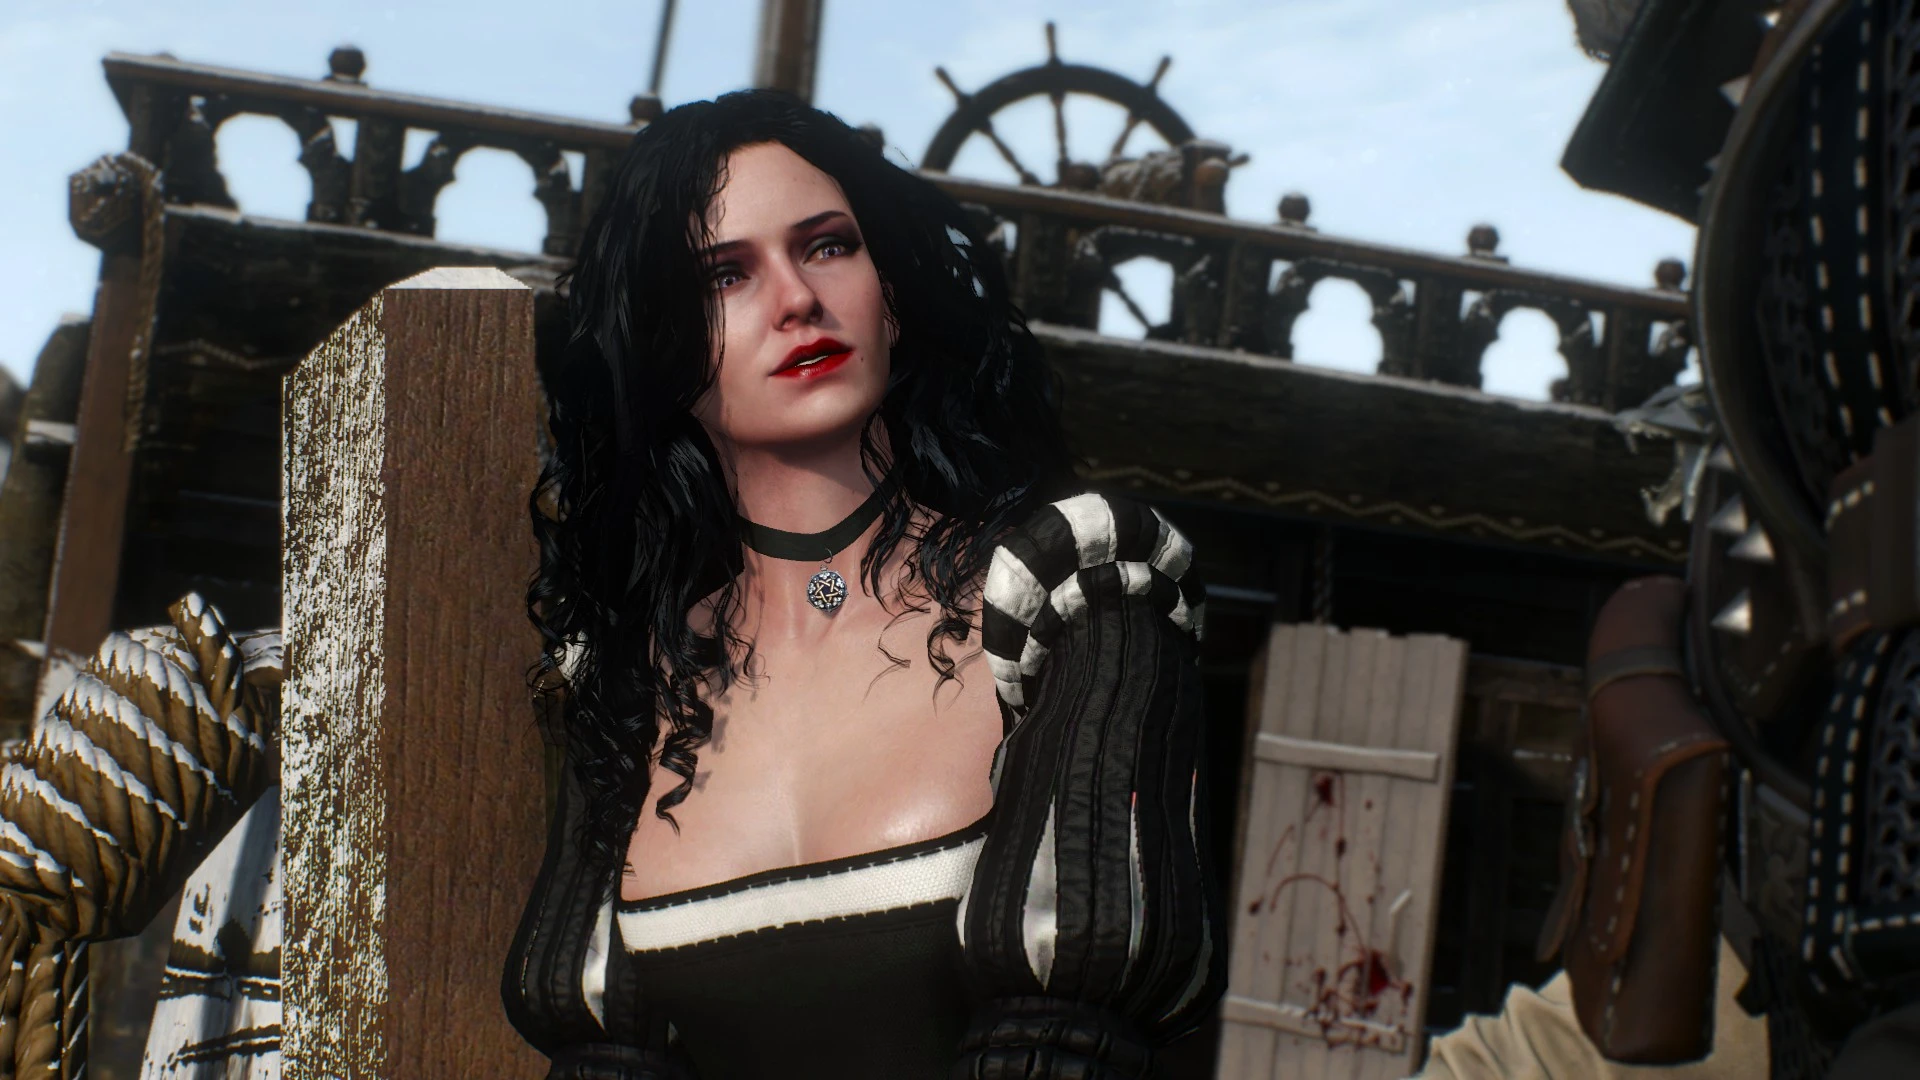 Yennefer of vengerberg the witcher 3 voiced standalone follower фото 27